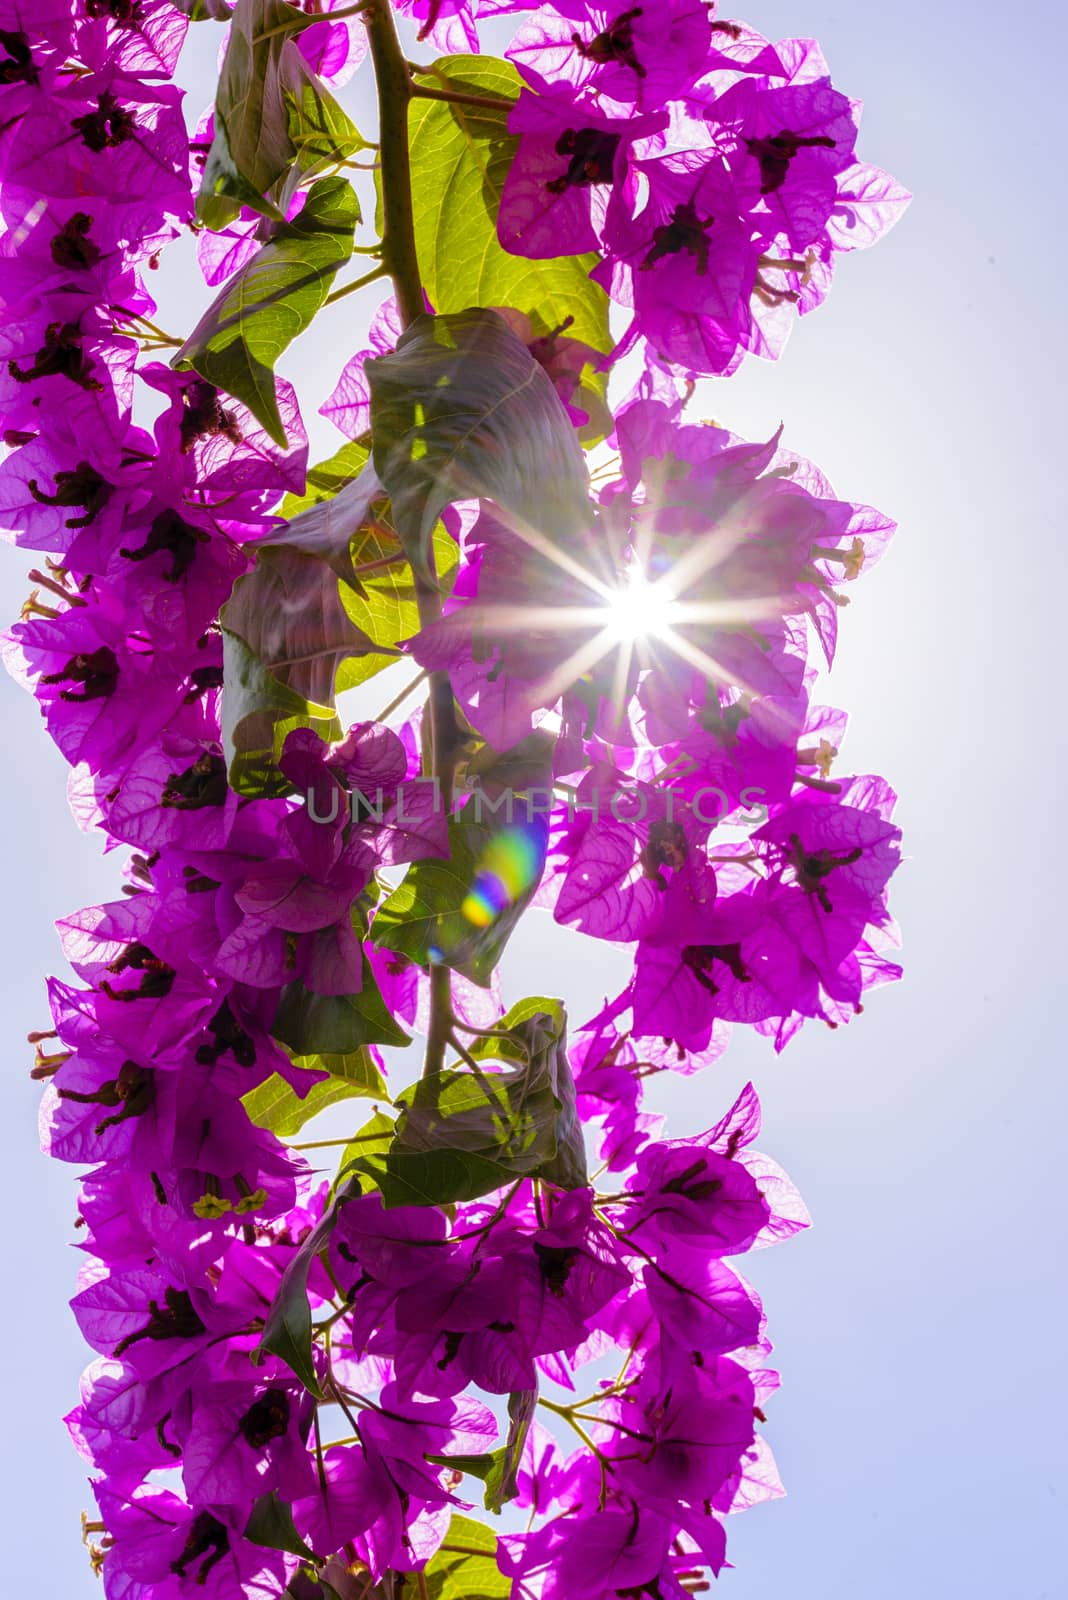 Bougainvillea or Paper flower treetop against blue sky by asafaric